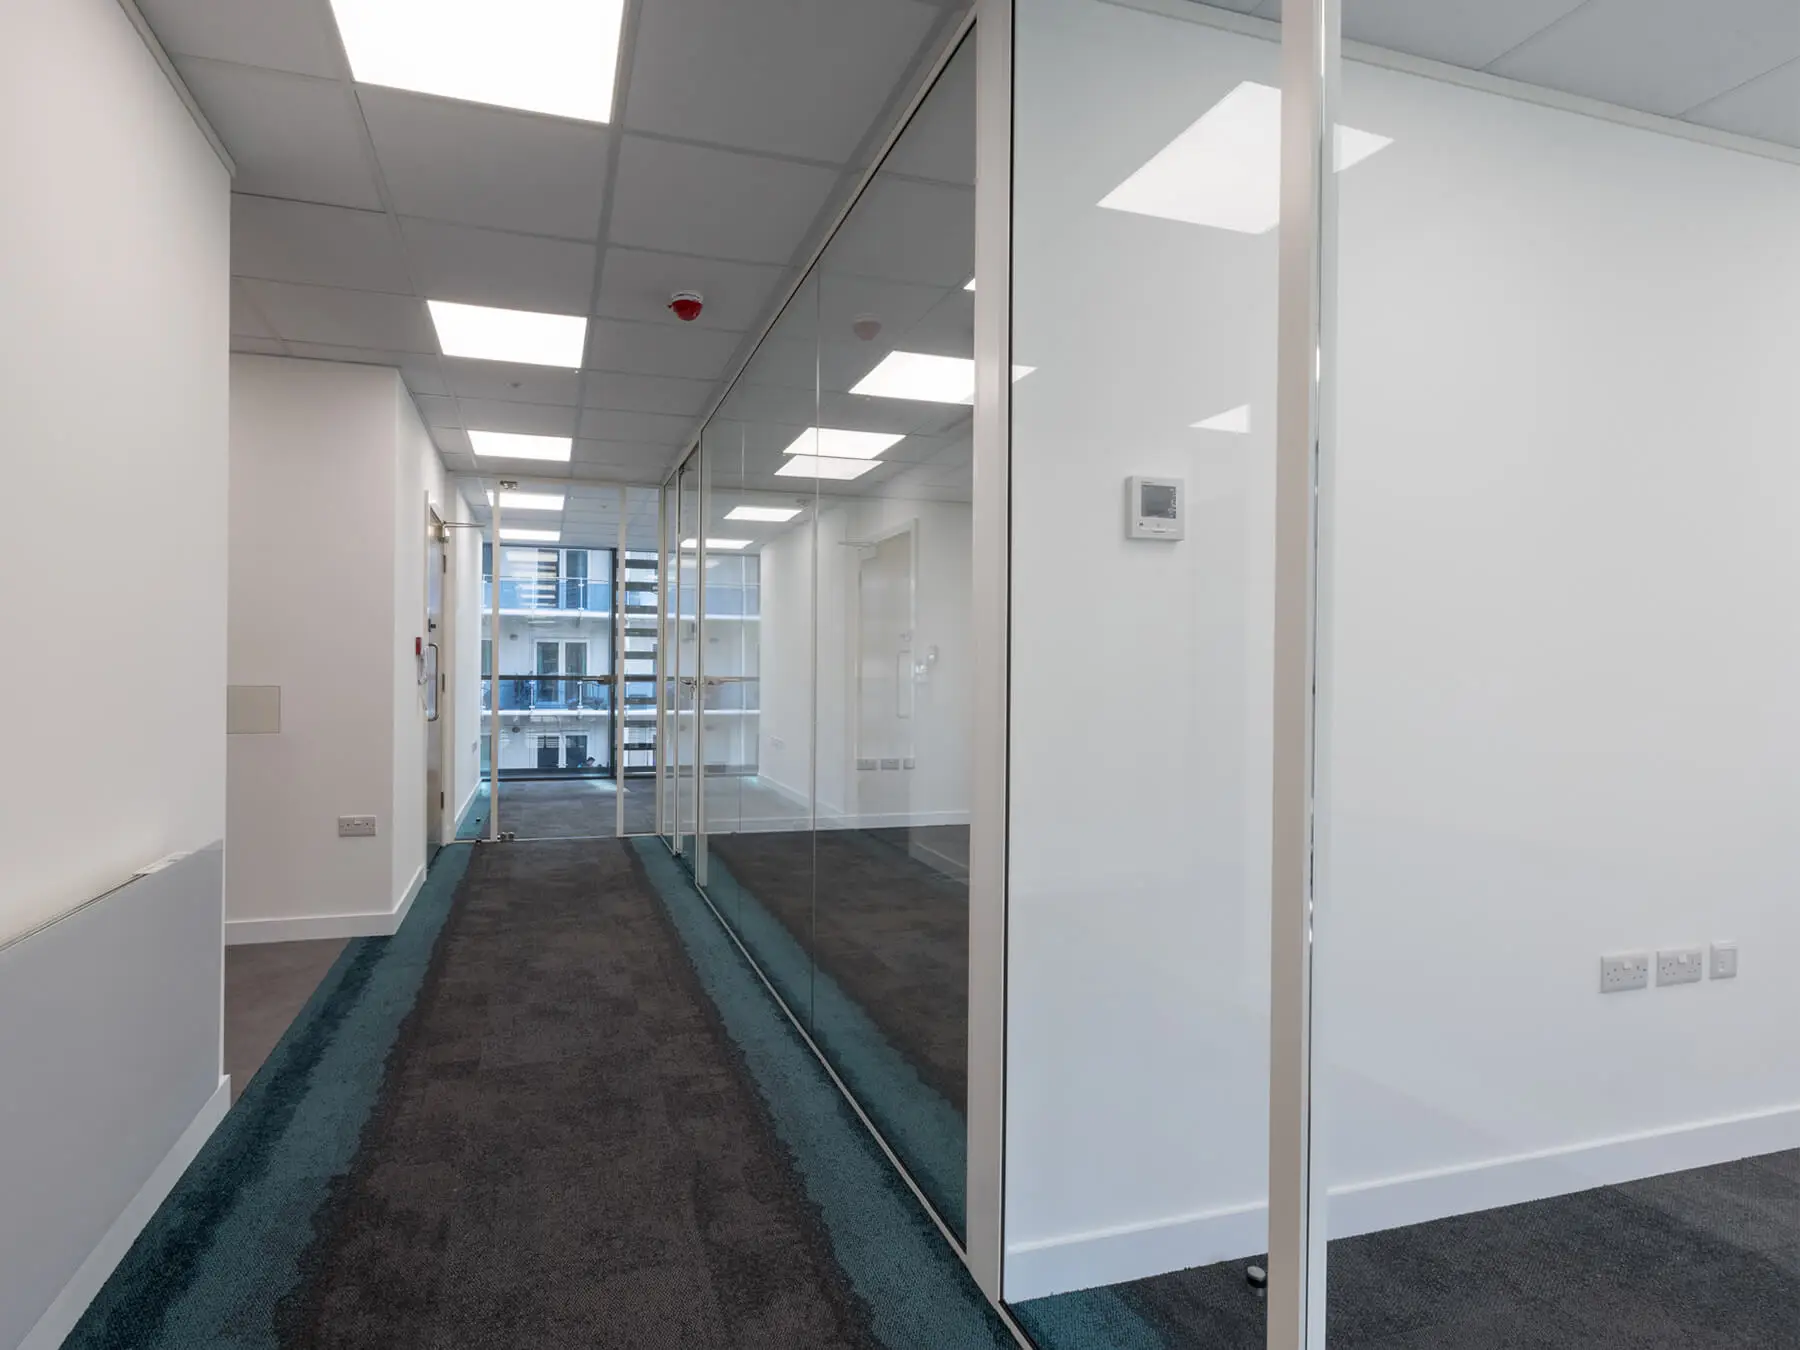 Office lobby with private space with single glazed partiton with framed doors